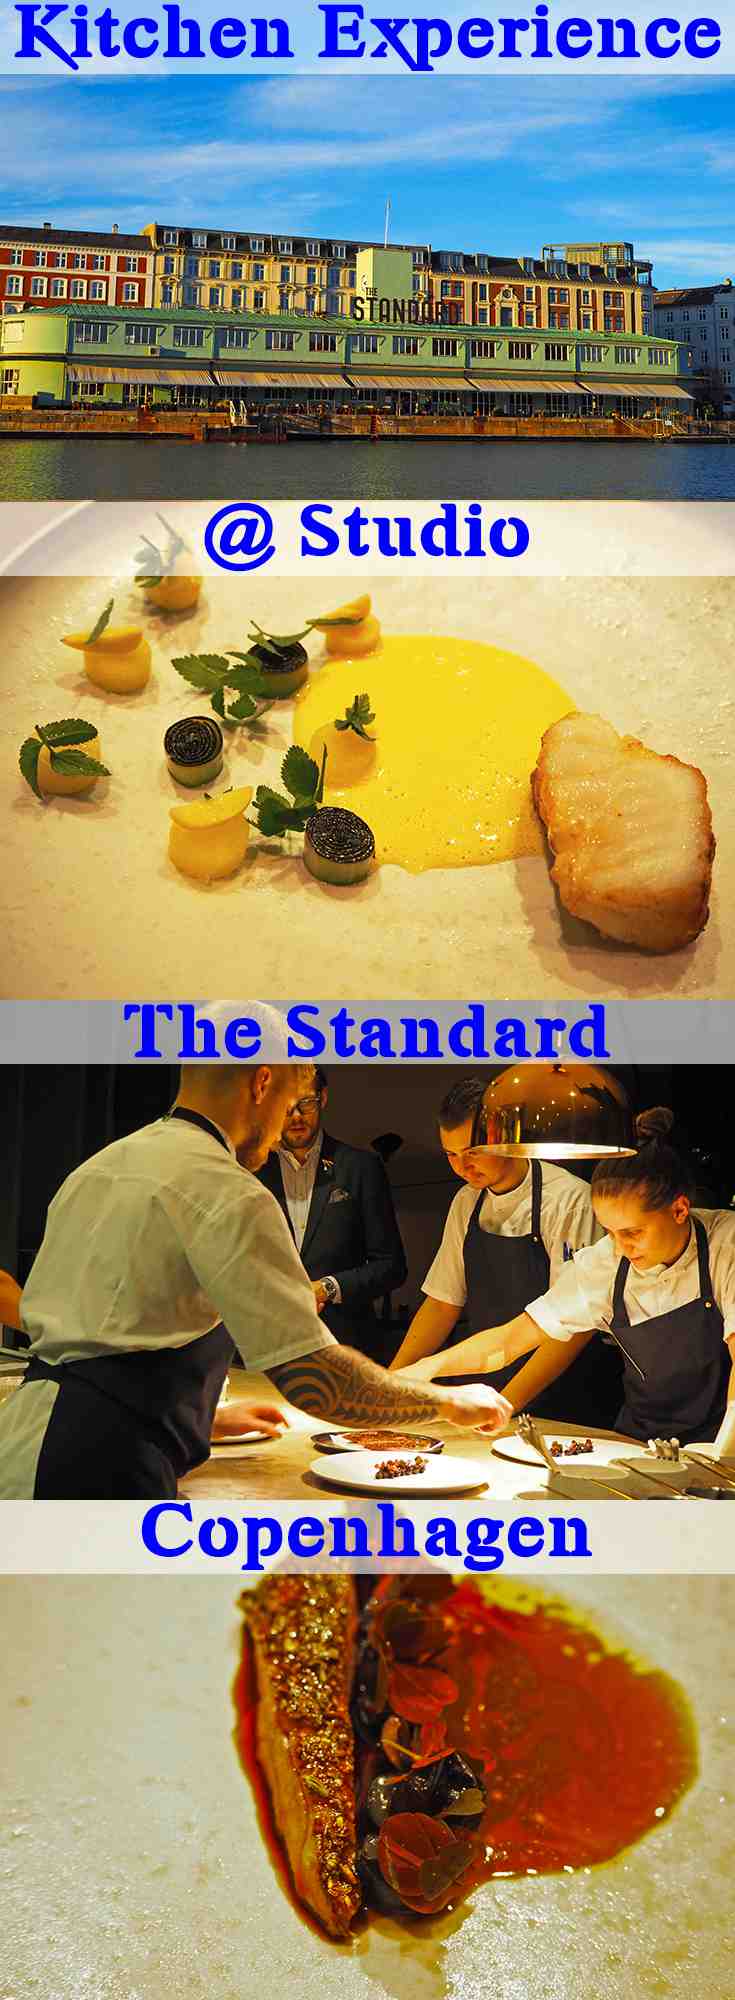 A Wonderful Kitchen Experience @ Studio – The Standard, Copenhagen, Denmark – WhodoIdo: A michelin star restaurant located along the harbour front. Watch the chefs prepare each dish in front of you. Book a table here for a special occasion!